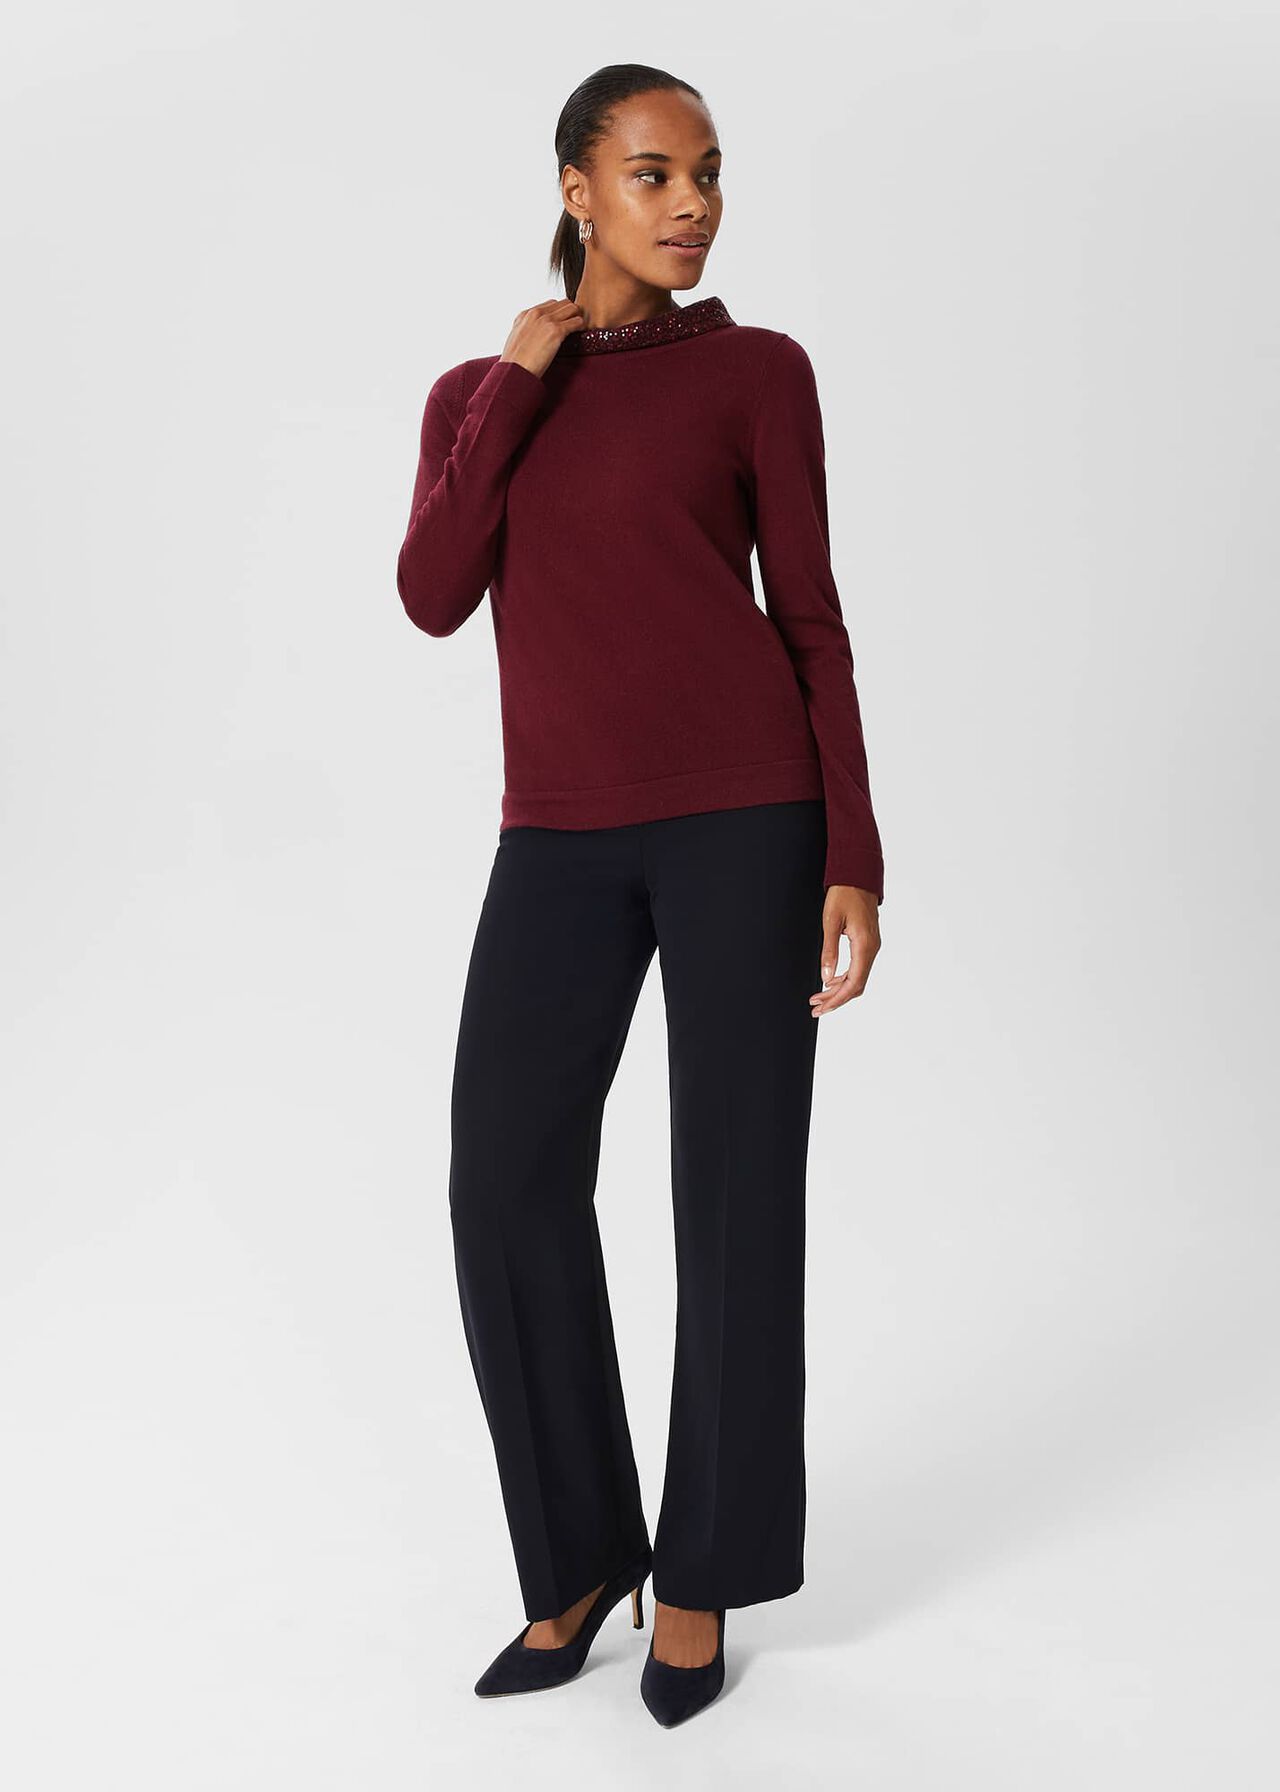 Esther Sequin Wool Cashmere Sweater, Burgundy, hi-res